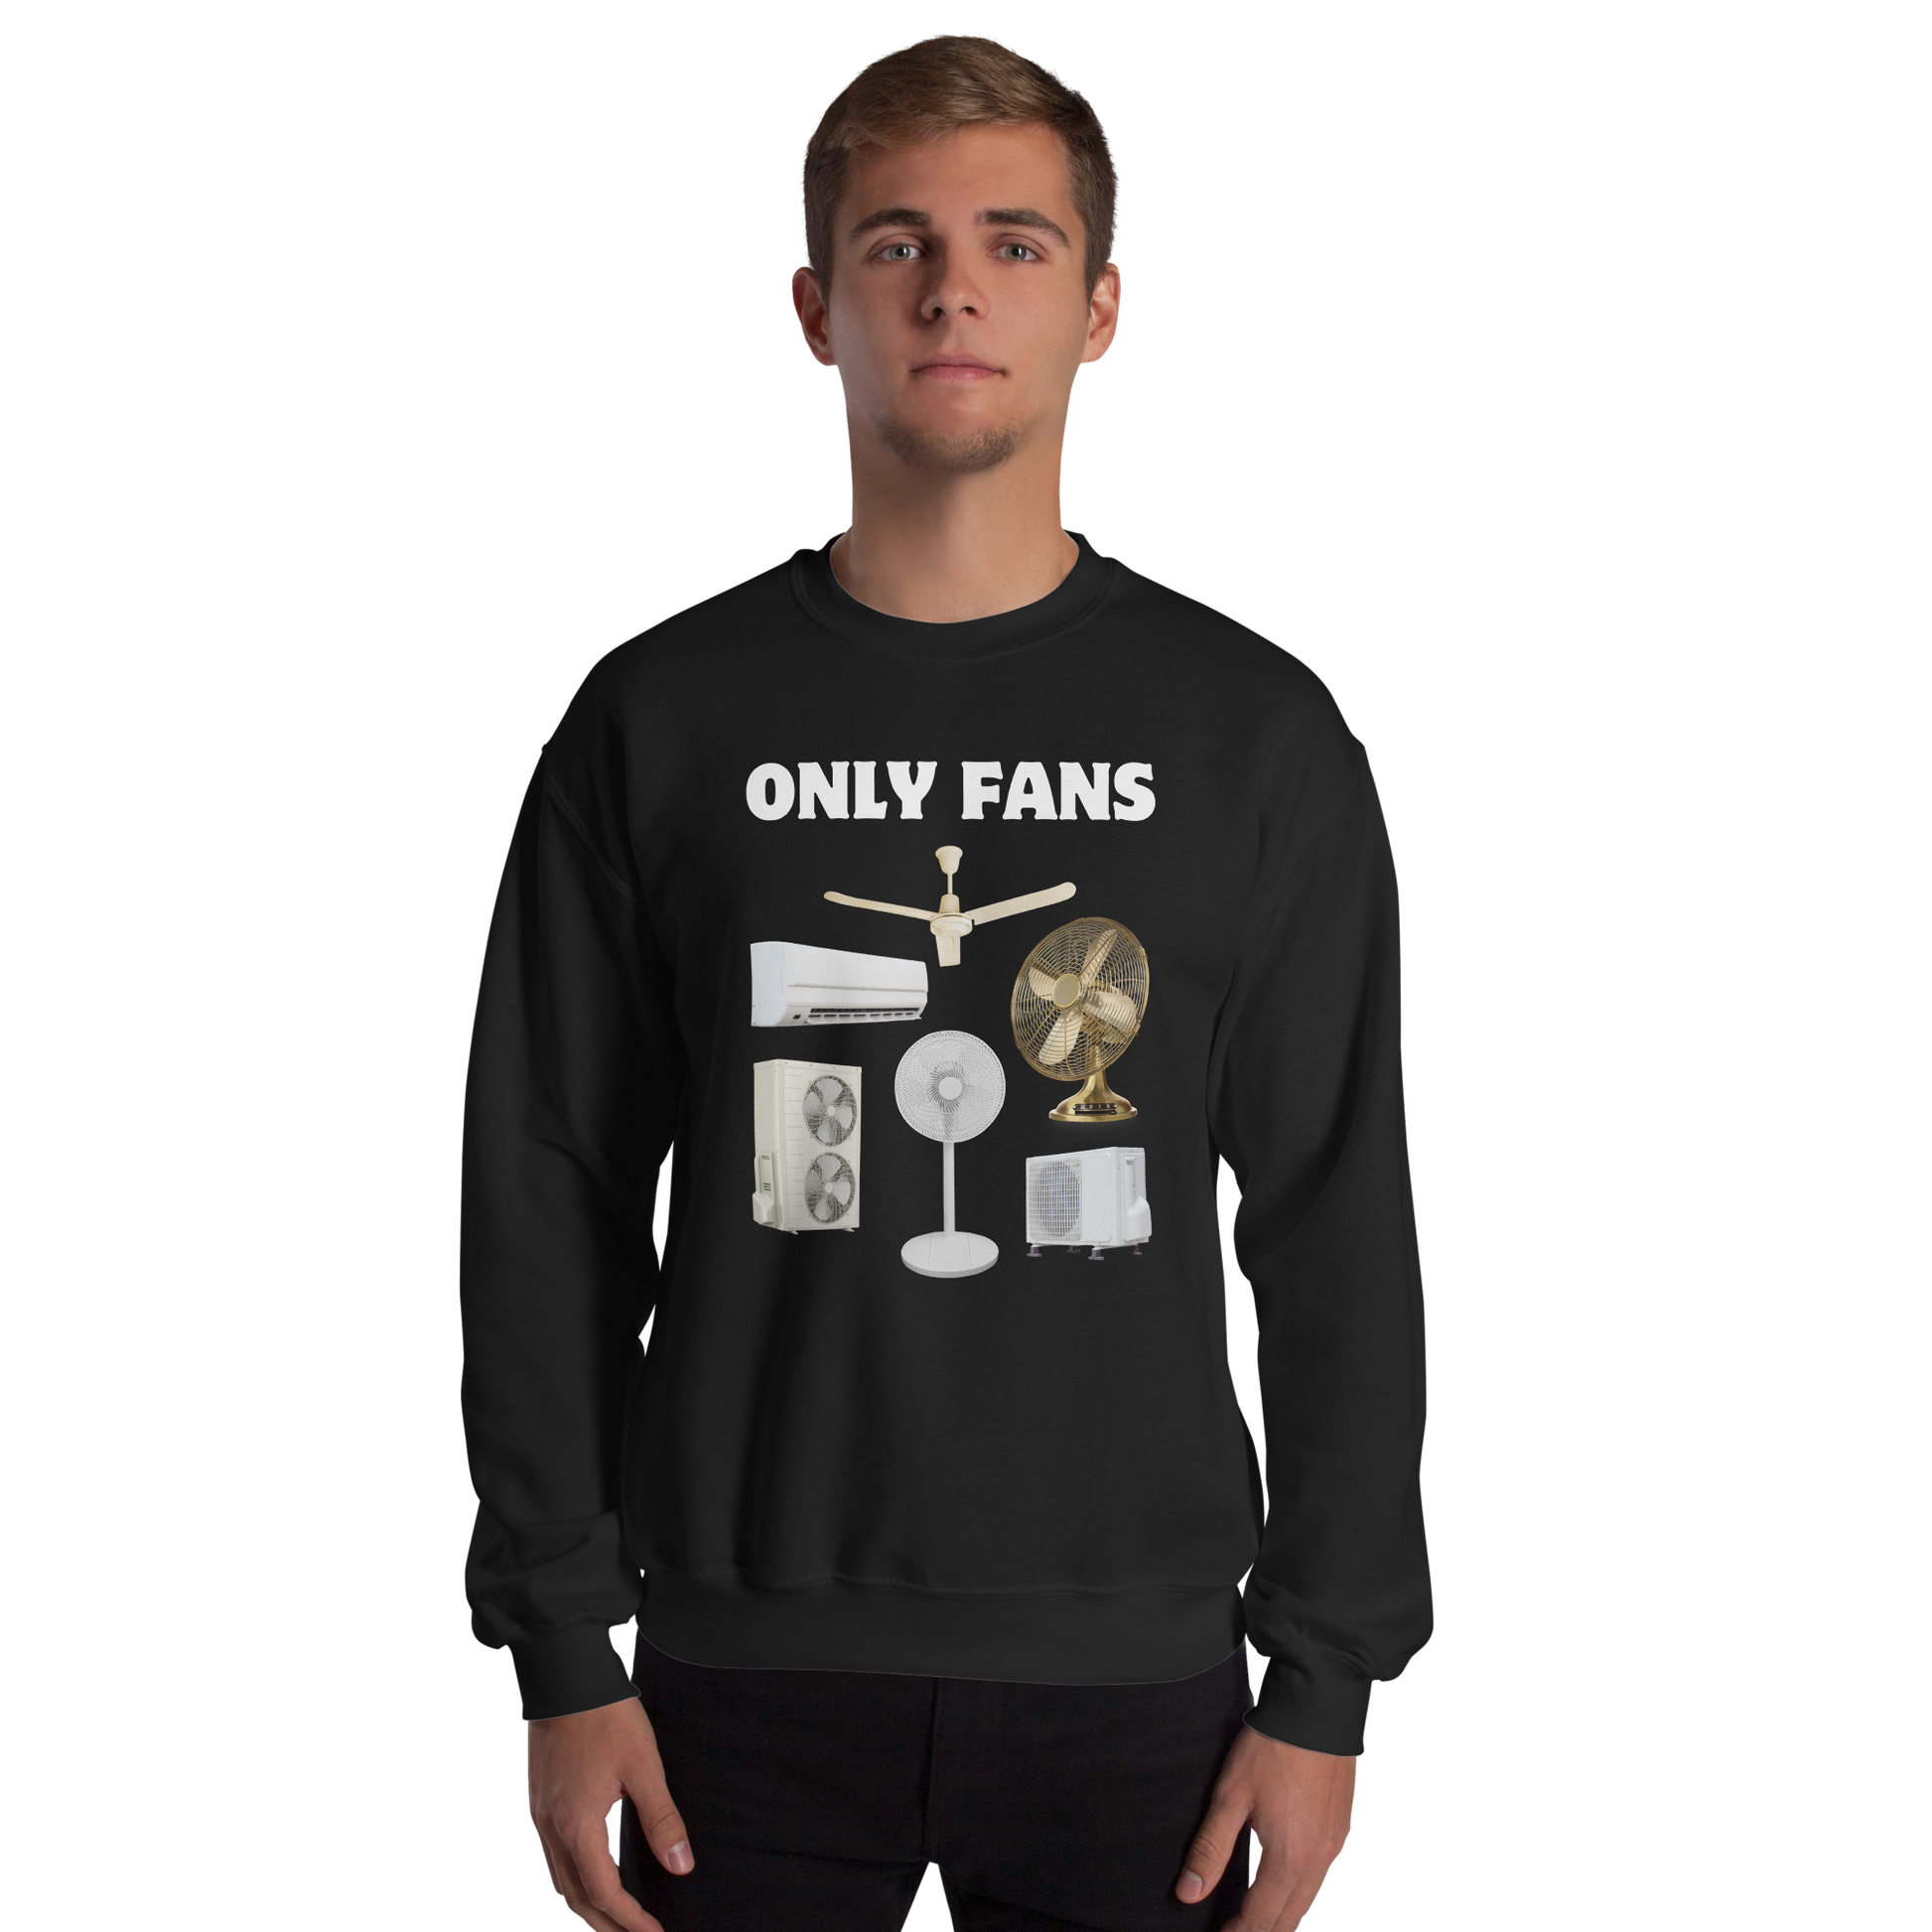 Man wearing a Black Only Fans Sweatshirt featuring a fun Fans graphic on the chest - Best Graphic Sweatshirts - Boozy Fox